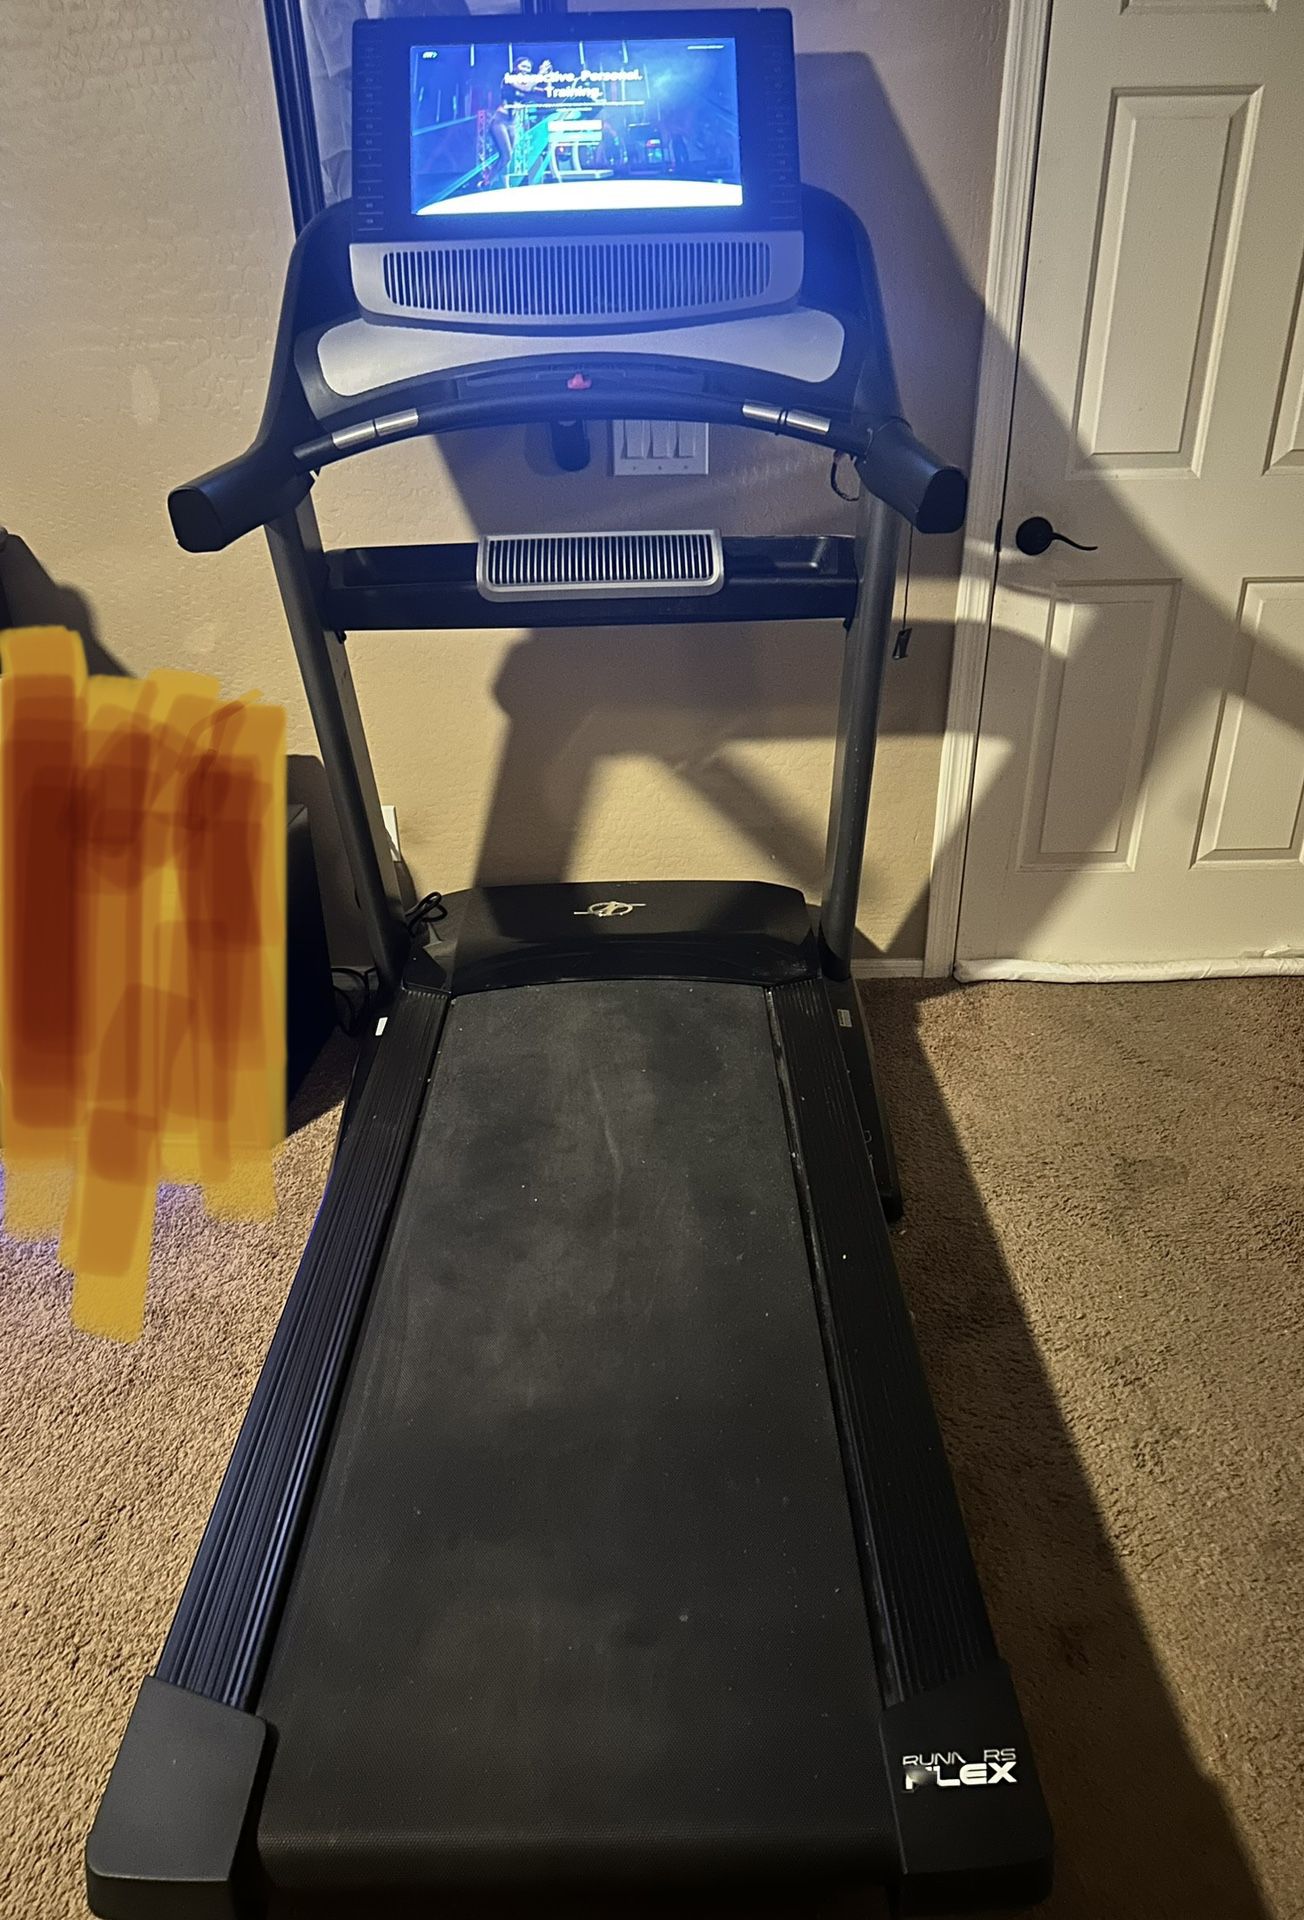 NordicTrack Commercial 2950 Treadmill - Make Offer